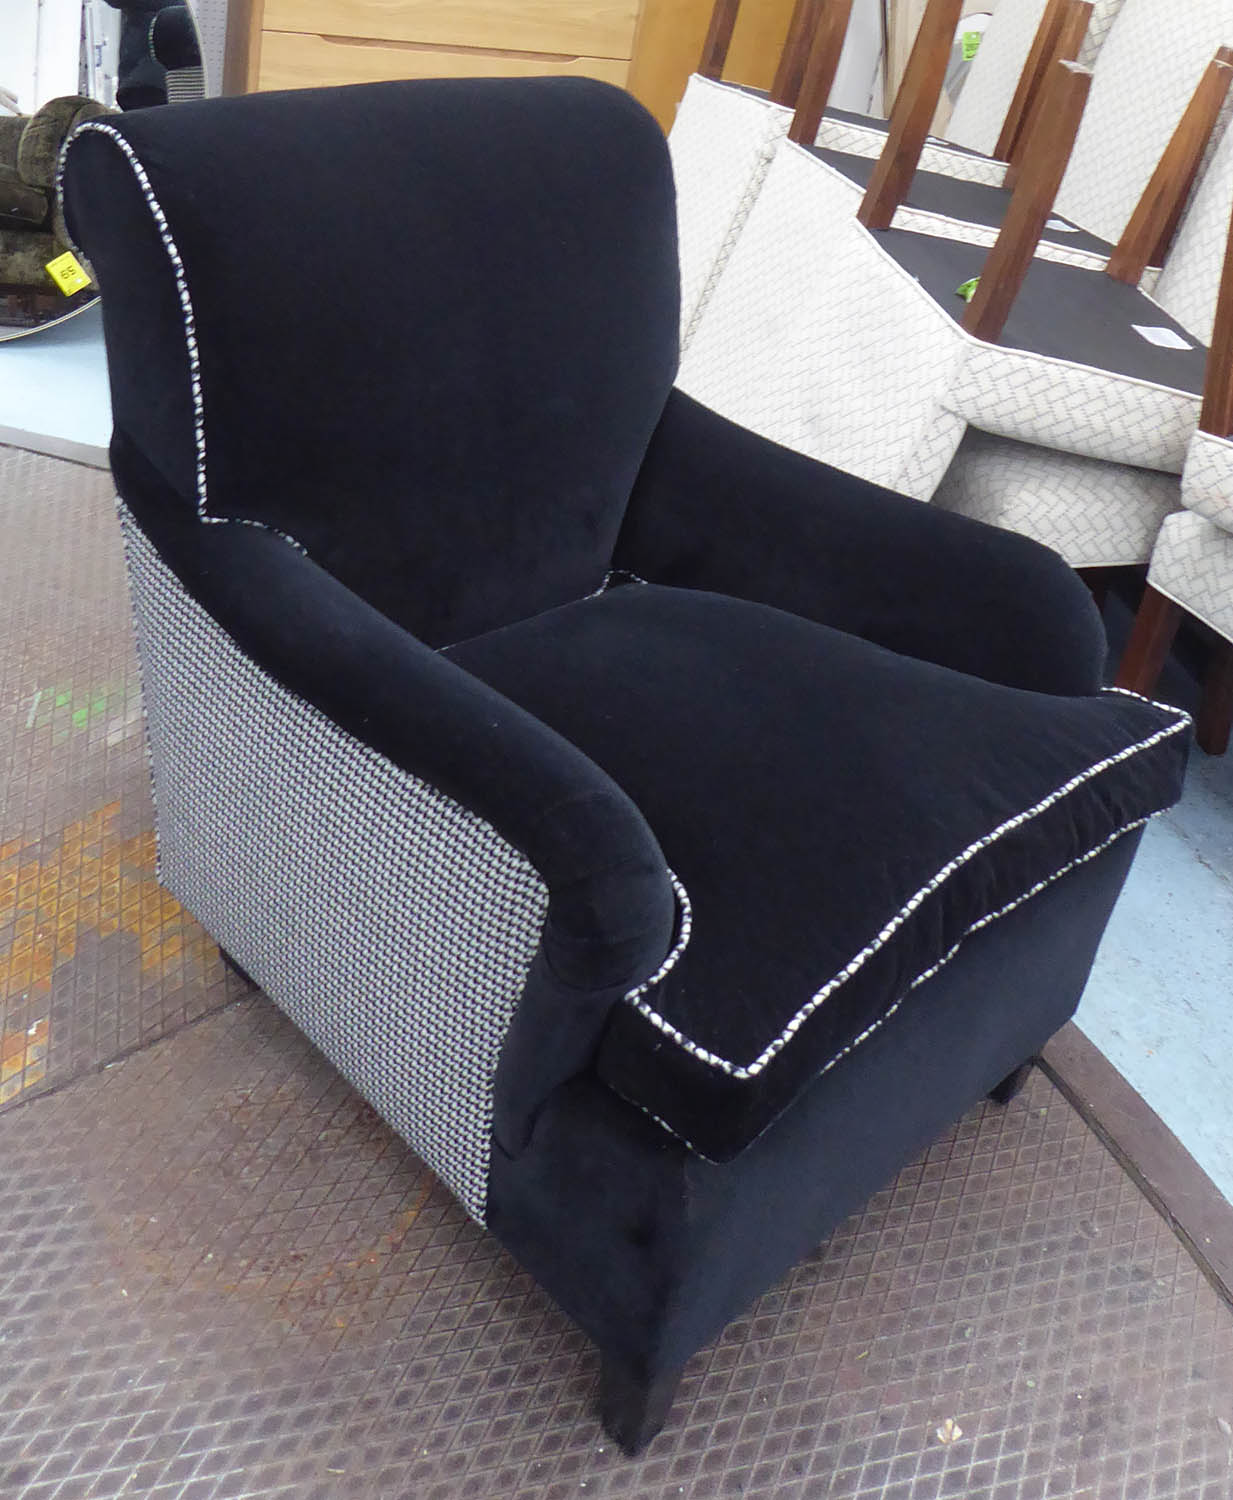 ARMCHAIR, with black velvet upholstery and a contrasting Houndstooth back and sides, 71cm W x 99cm